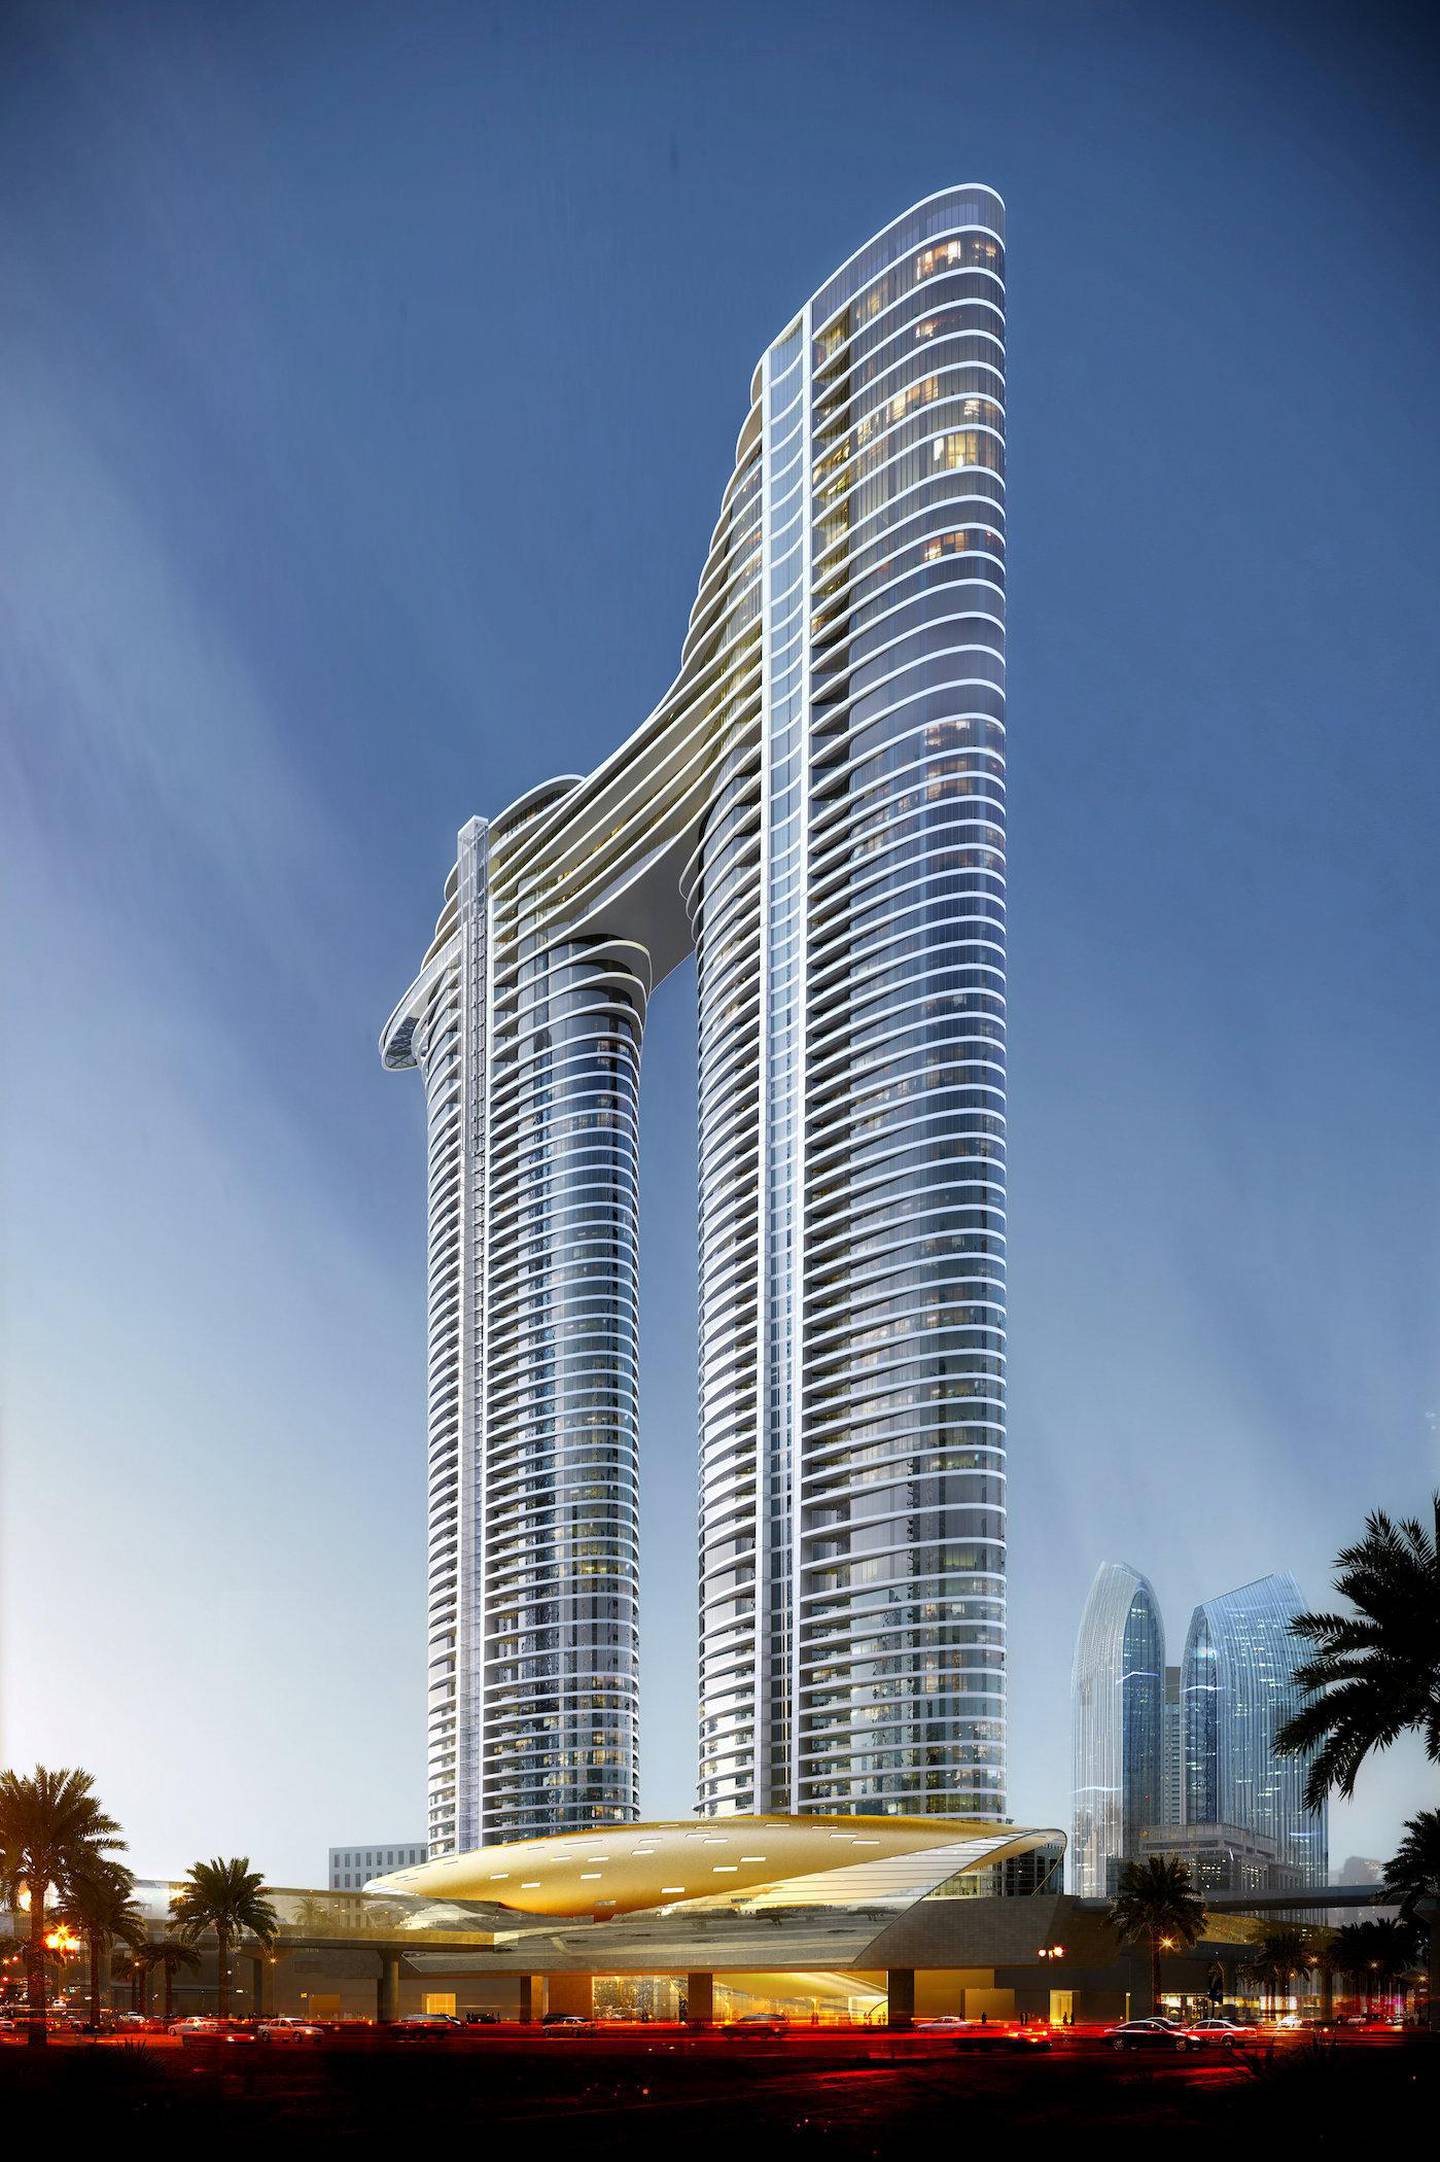 The Address Sky View was designed by the same architects that created Dubai's Burj Khalifa 